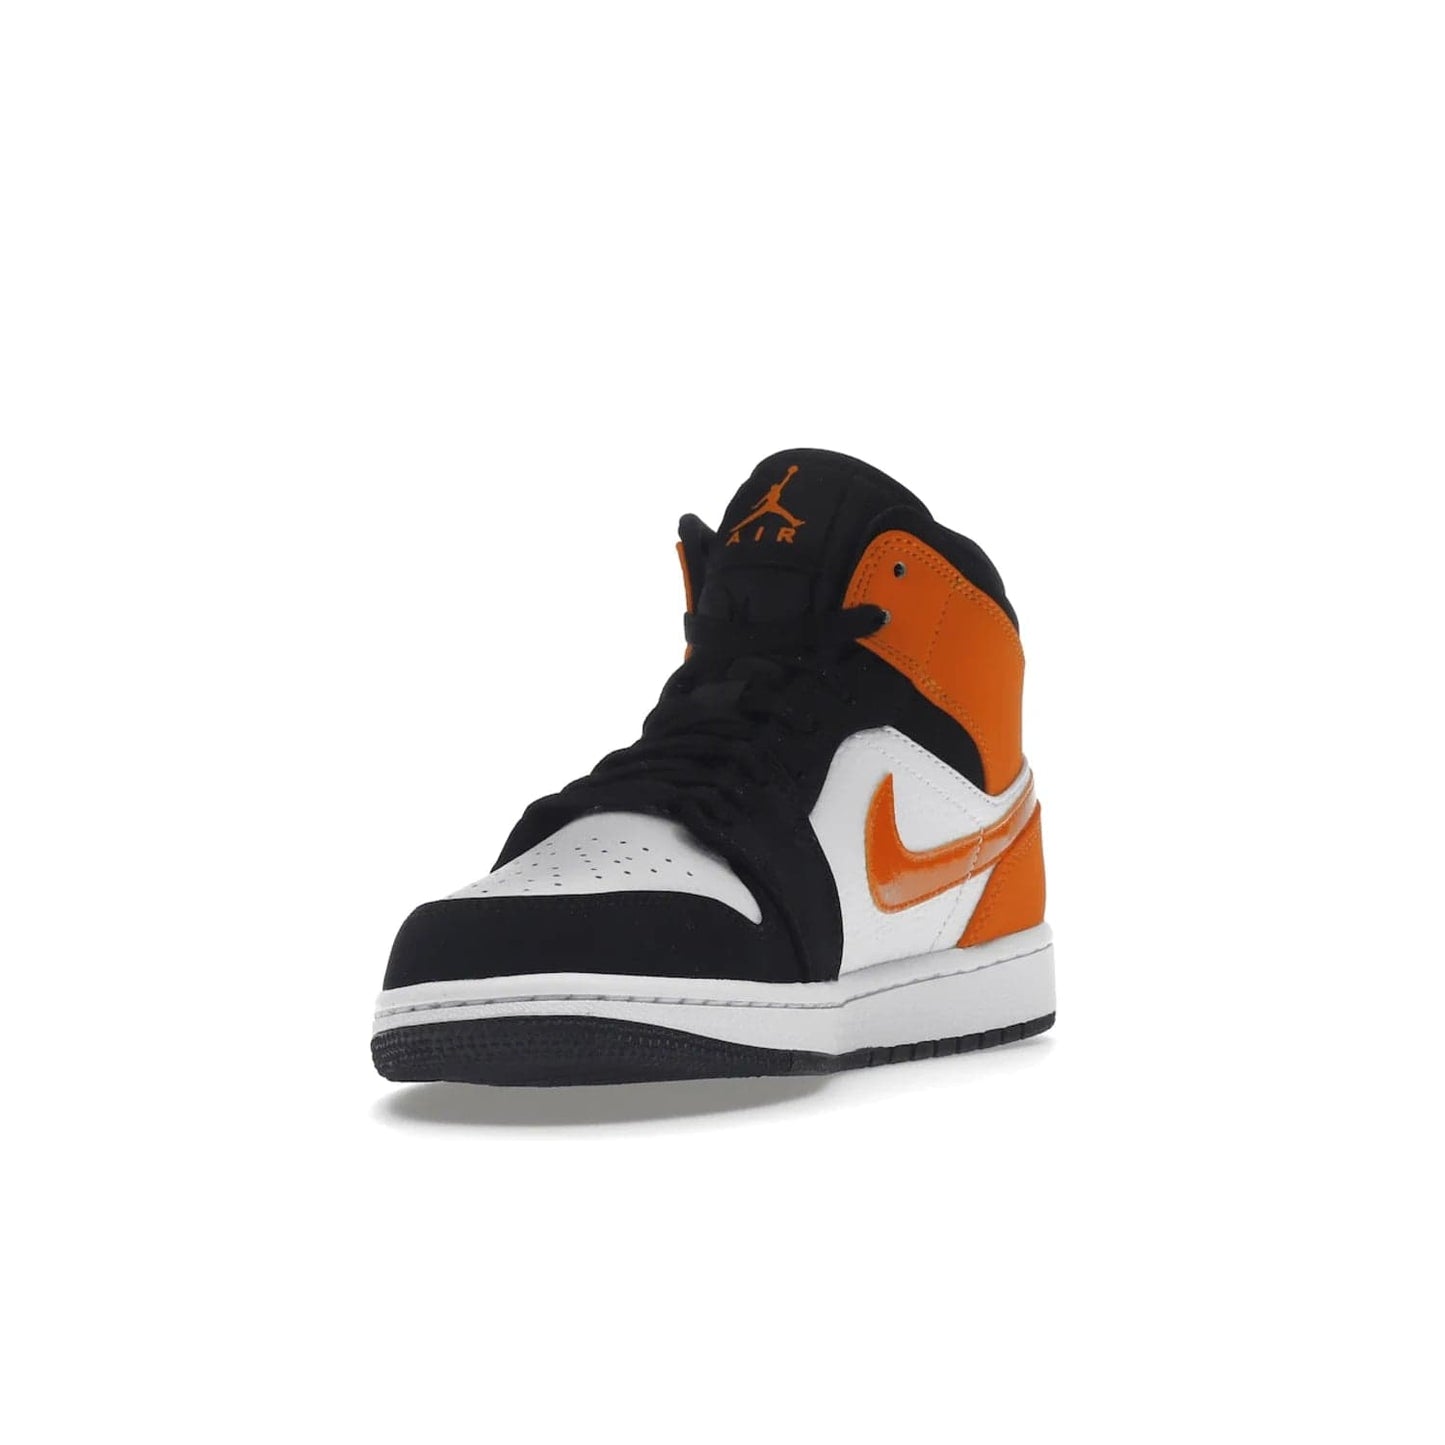 Jordan 1 Mid Shattered Backboard - Image 13 - Only at www.BallersClubKickz.com - The Air Jordan 1 Mid Shattered Backboard offers a timeless Black/White-Starfish colorway. Classic Swoosh logo and AJ insignia plus a shatterd backboard graphic on the insole. Get your pair today!